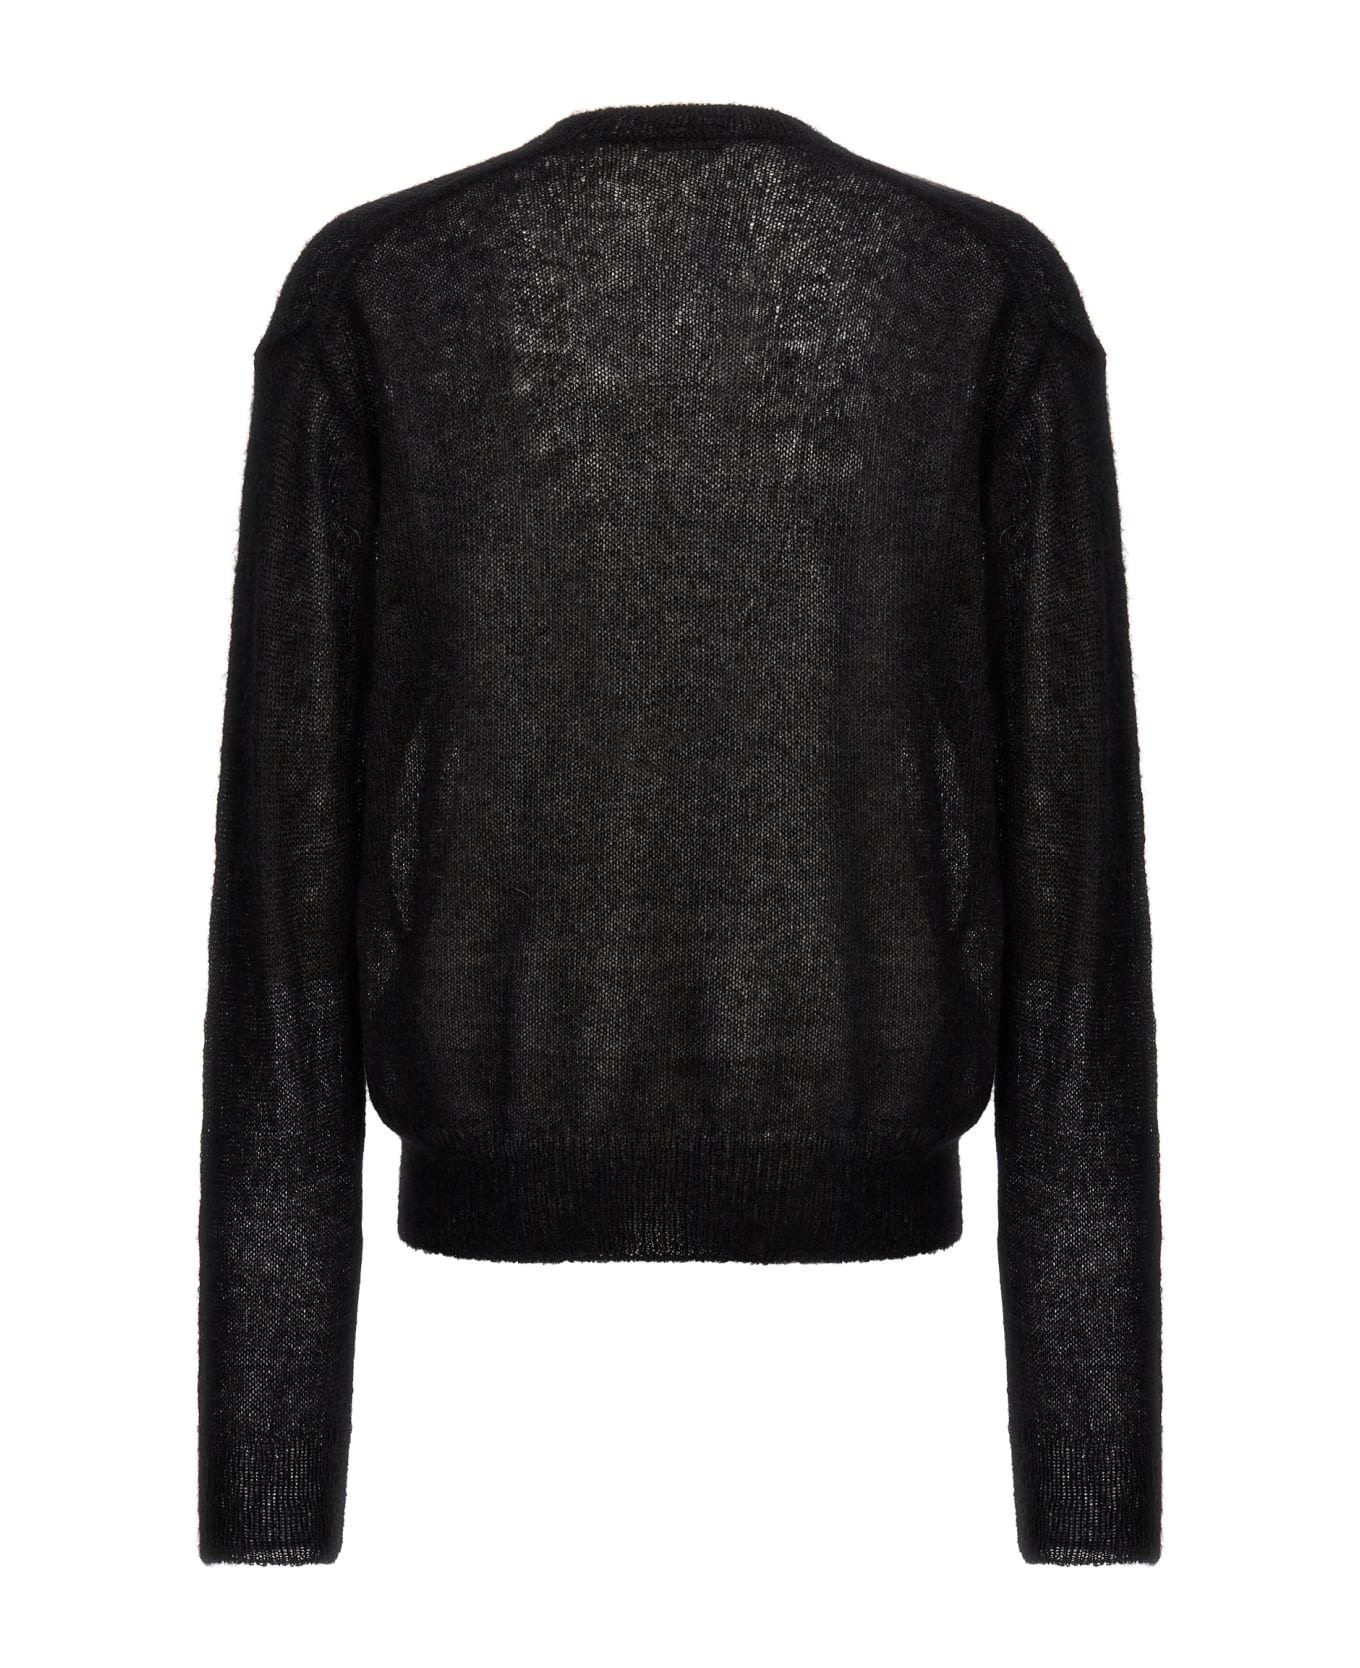 Tom Ford Mohair Sweater - Black